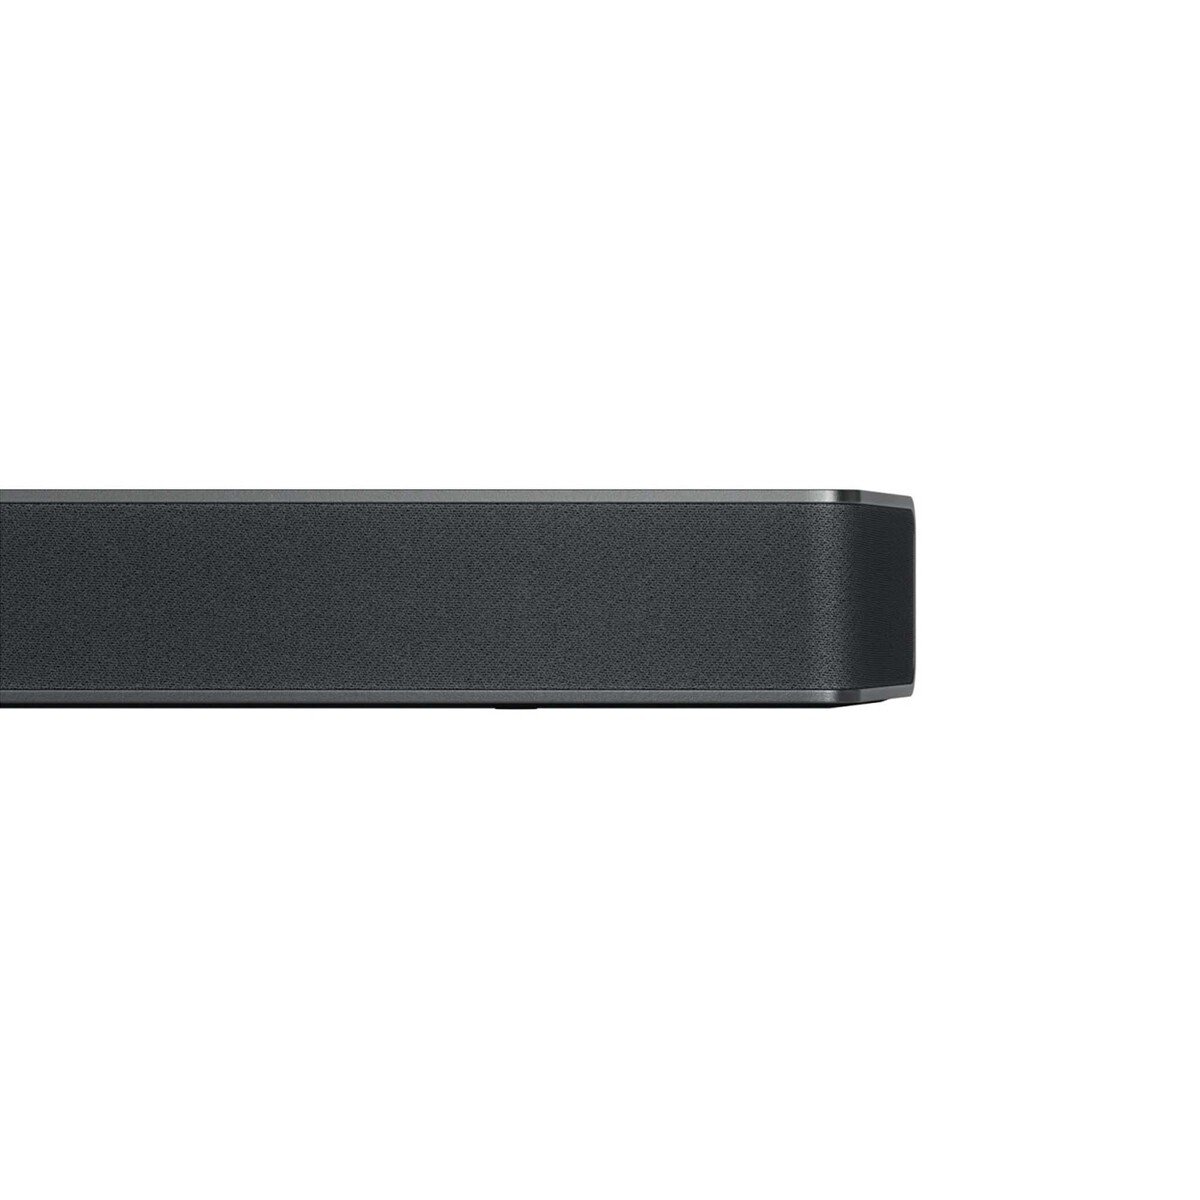 LG 9.1.5 ch Sound Bar with Dolby Atmos and Surround Speakers, 810 W, Black, S95QR